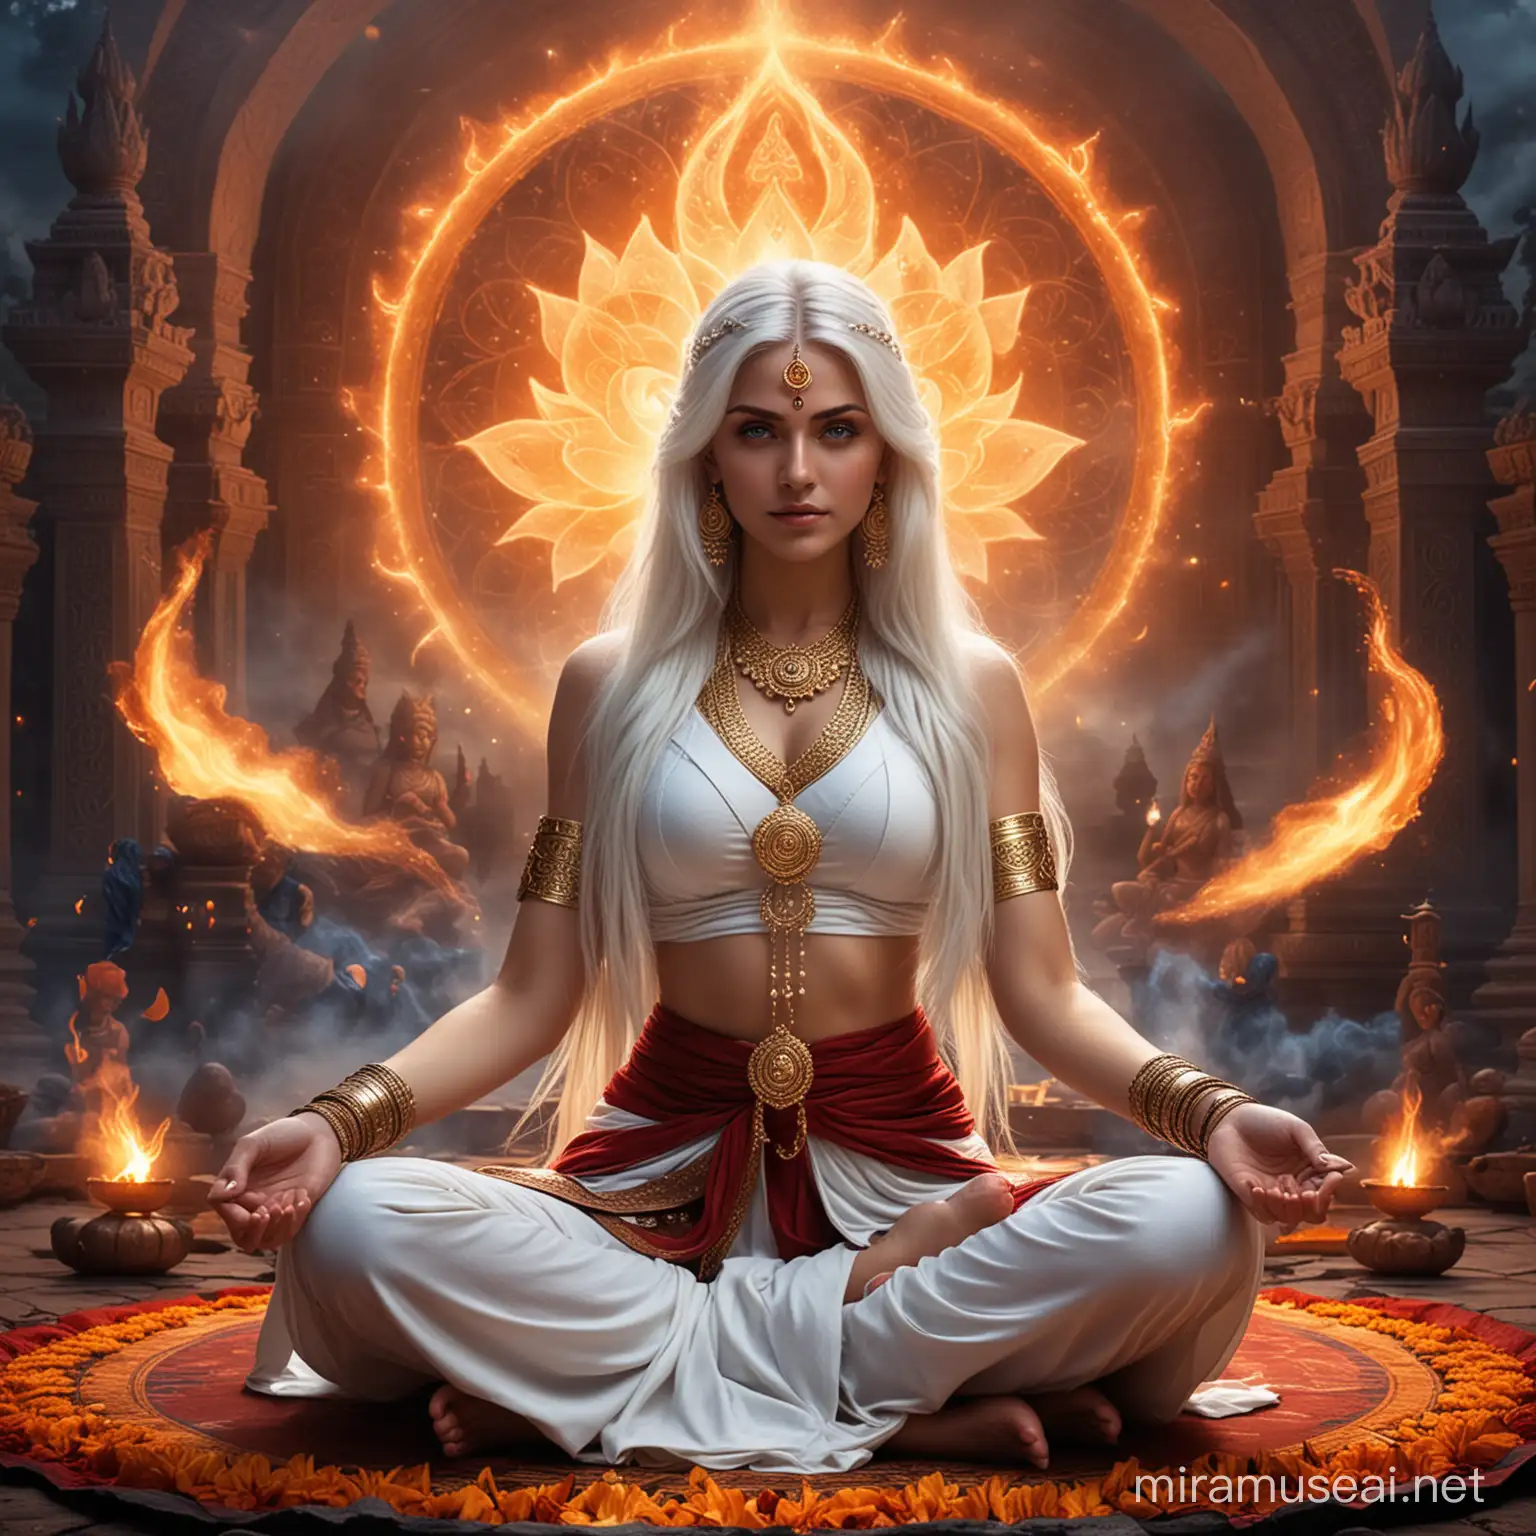 Mystical Hindu Empress in Lotus Position Amidst Fiery Circles